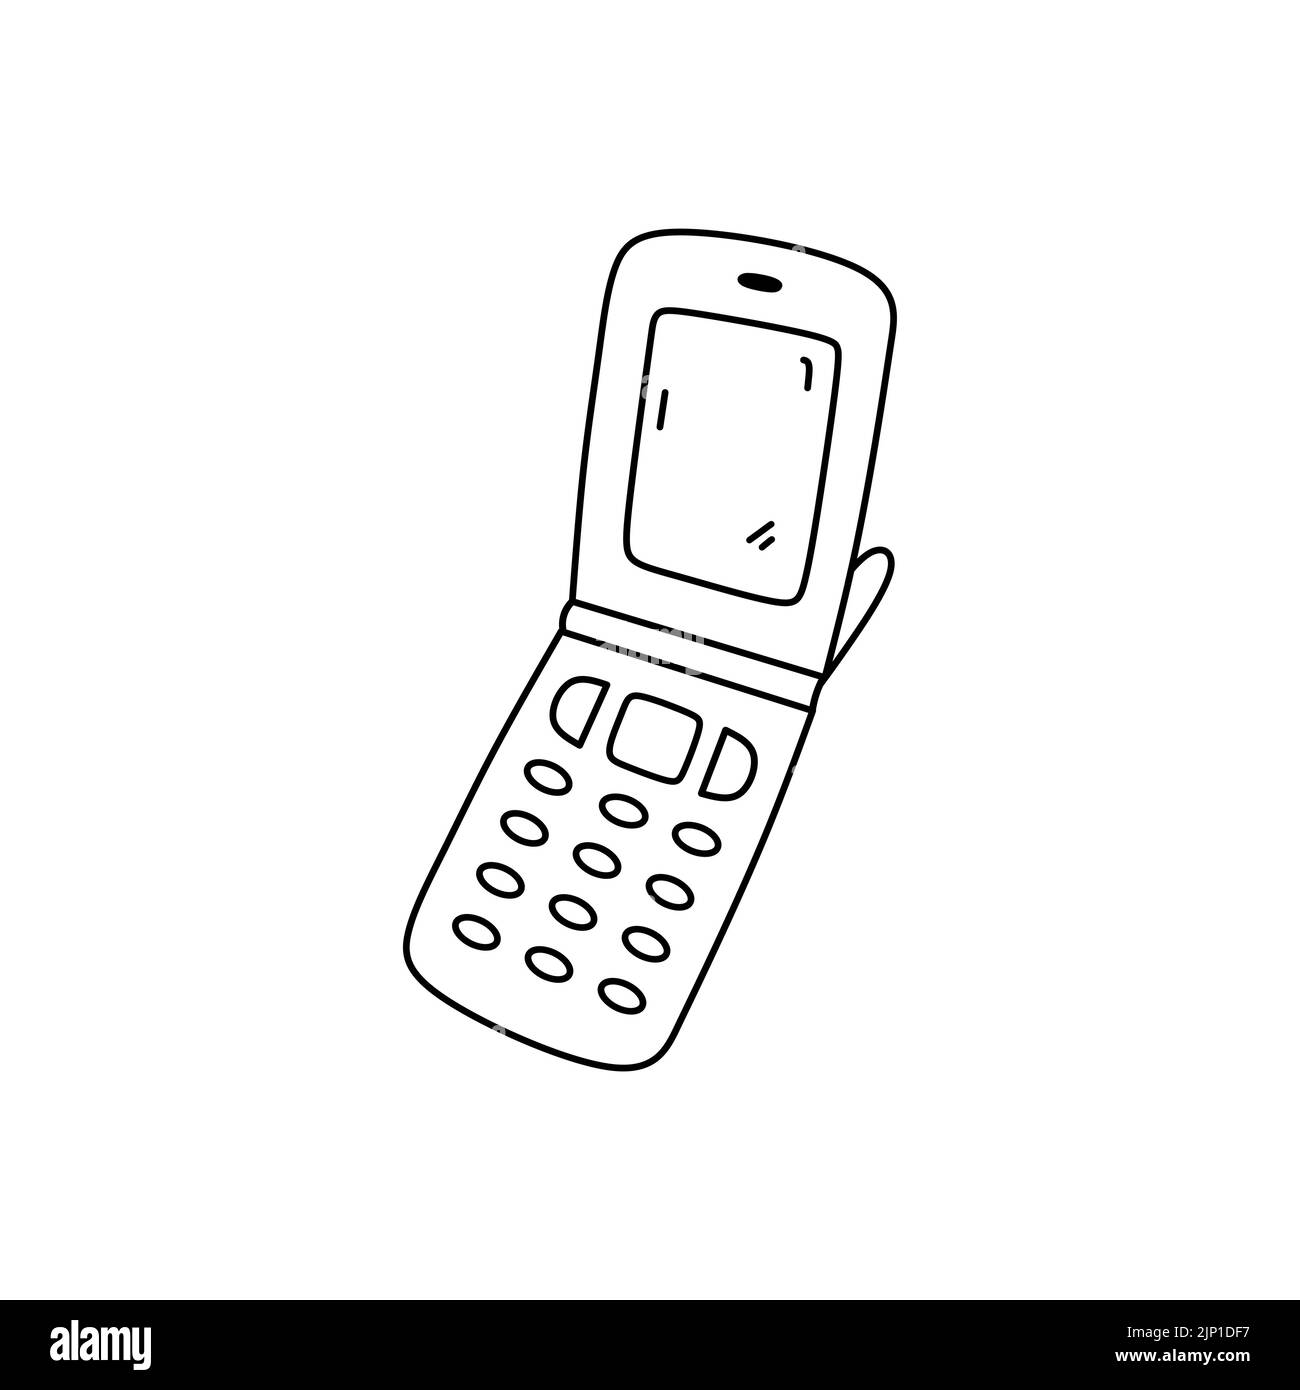 Retro flip phone isolated on white background. Vector hand-drawn illustration in doodle style. Old fashioned mobile phone. Perfect for decorations, logo, various designs. Stock Vector